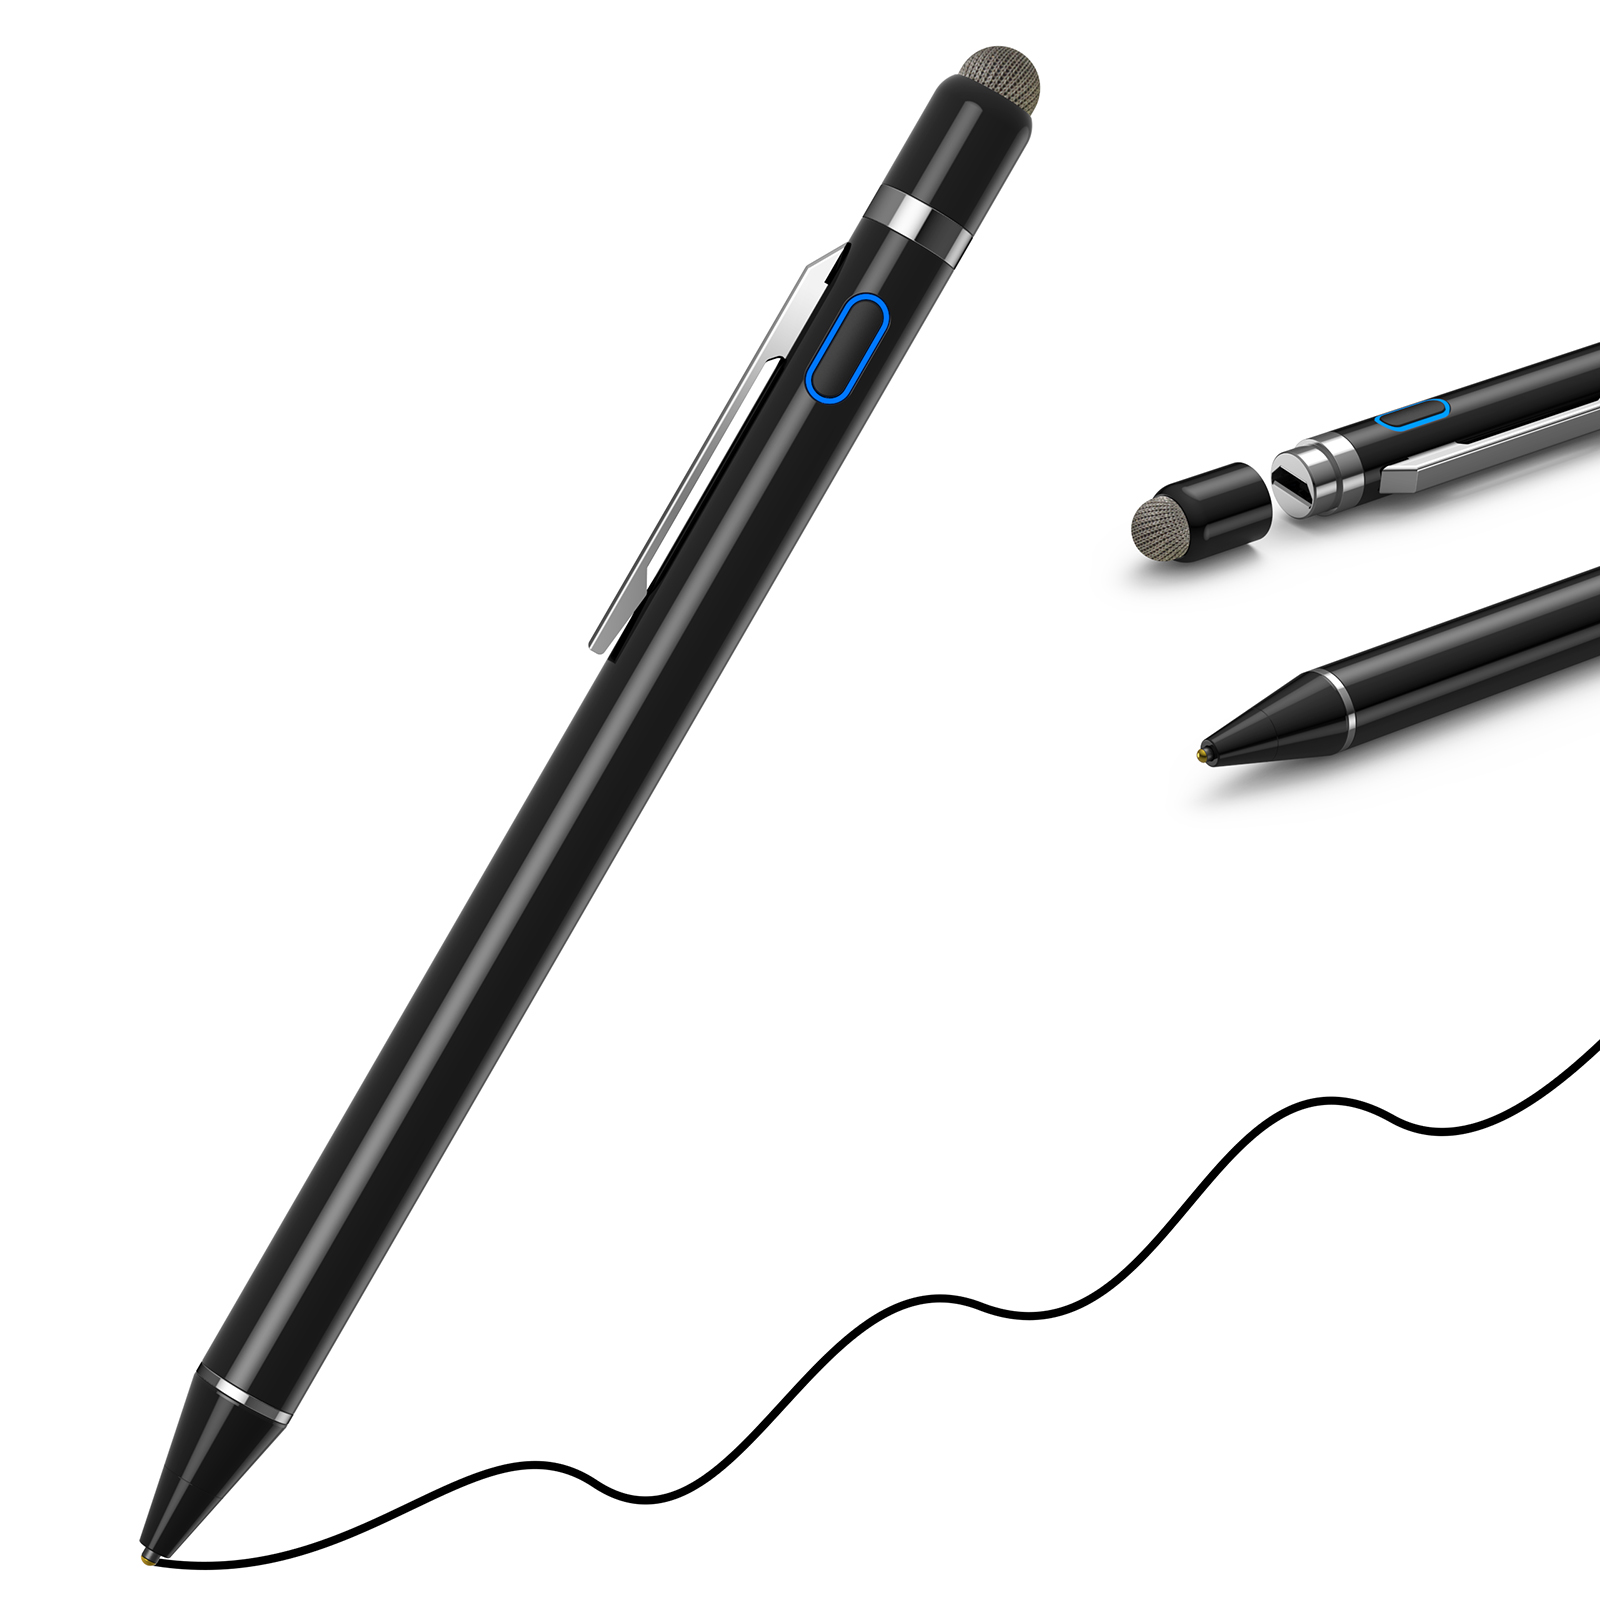 Reasonable price for Pencil For Tablet Huawei - K825 2in1 Stylus Pen, can be used without charging – Centyoo